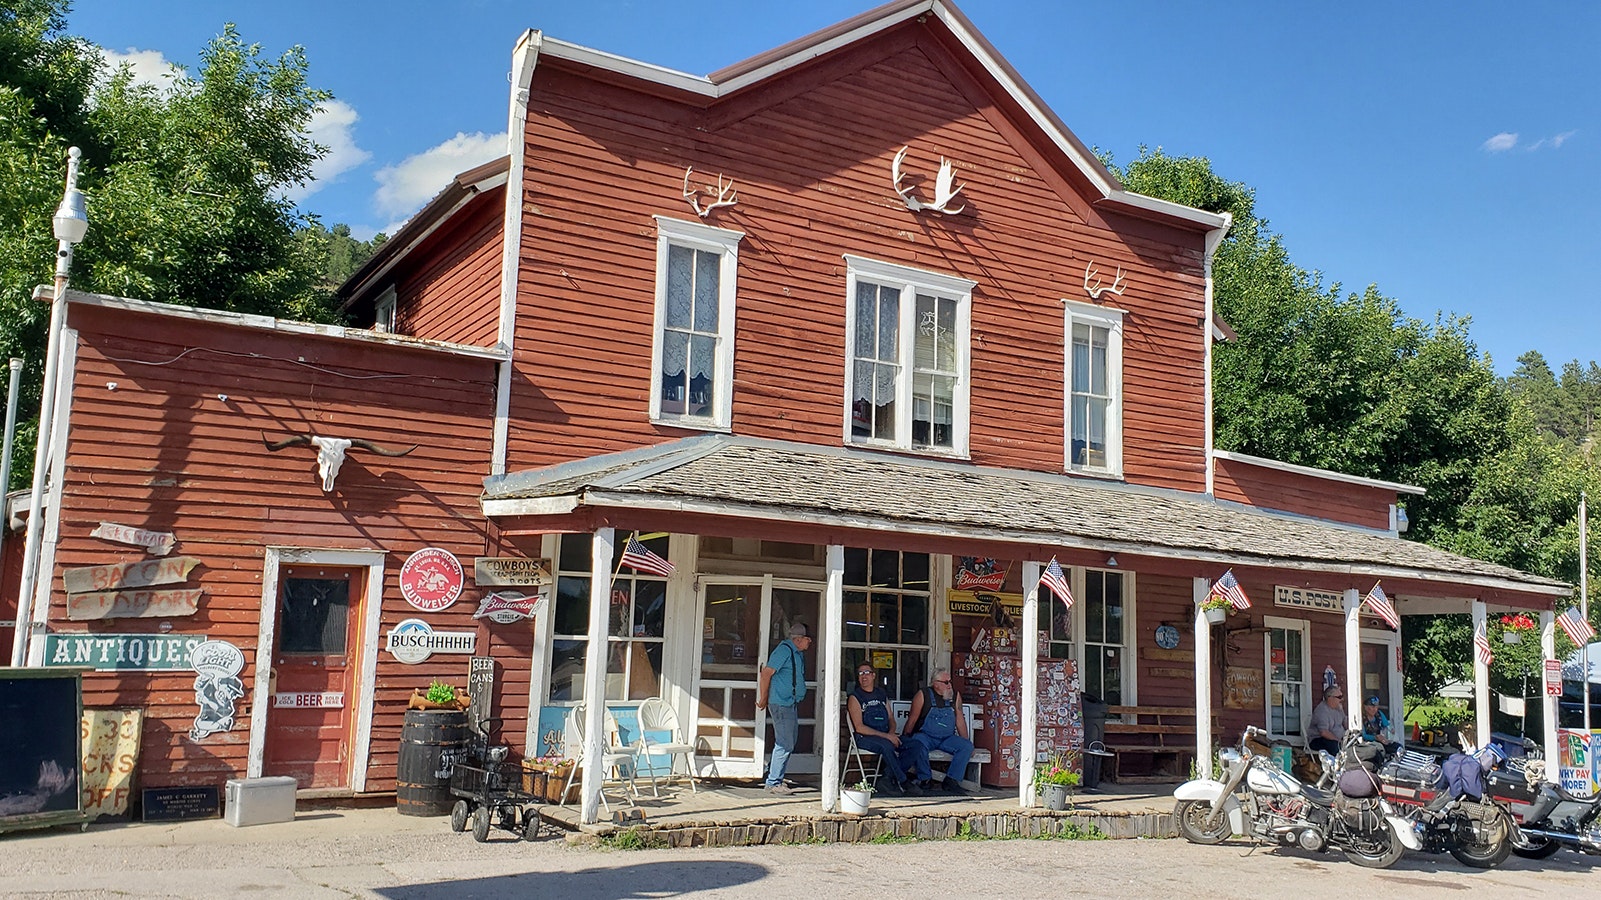 The Aladdin General Store is the oldest operating general store in Wyoming.